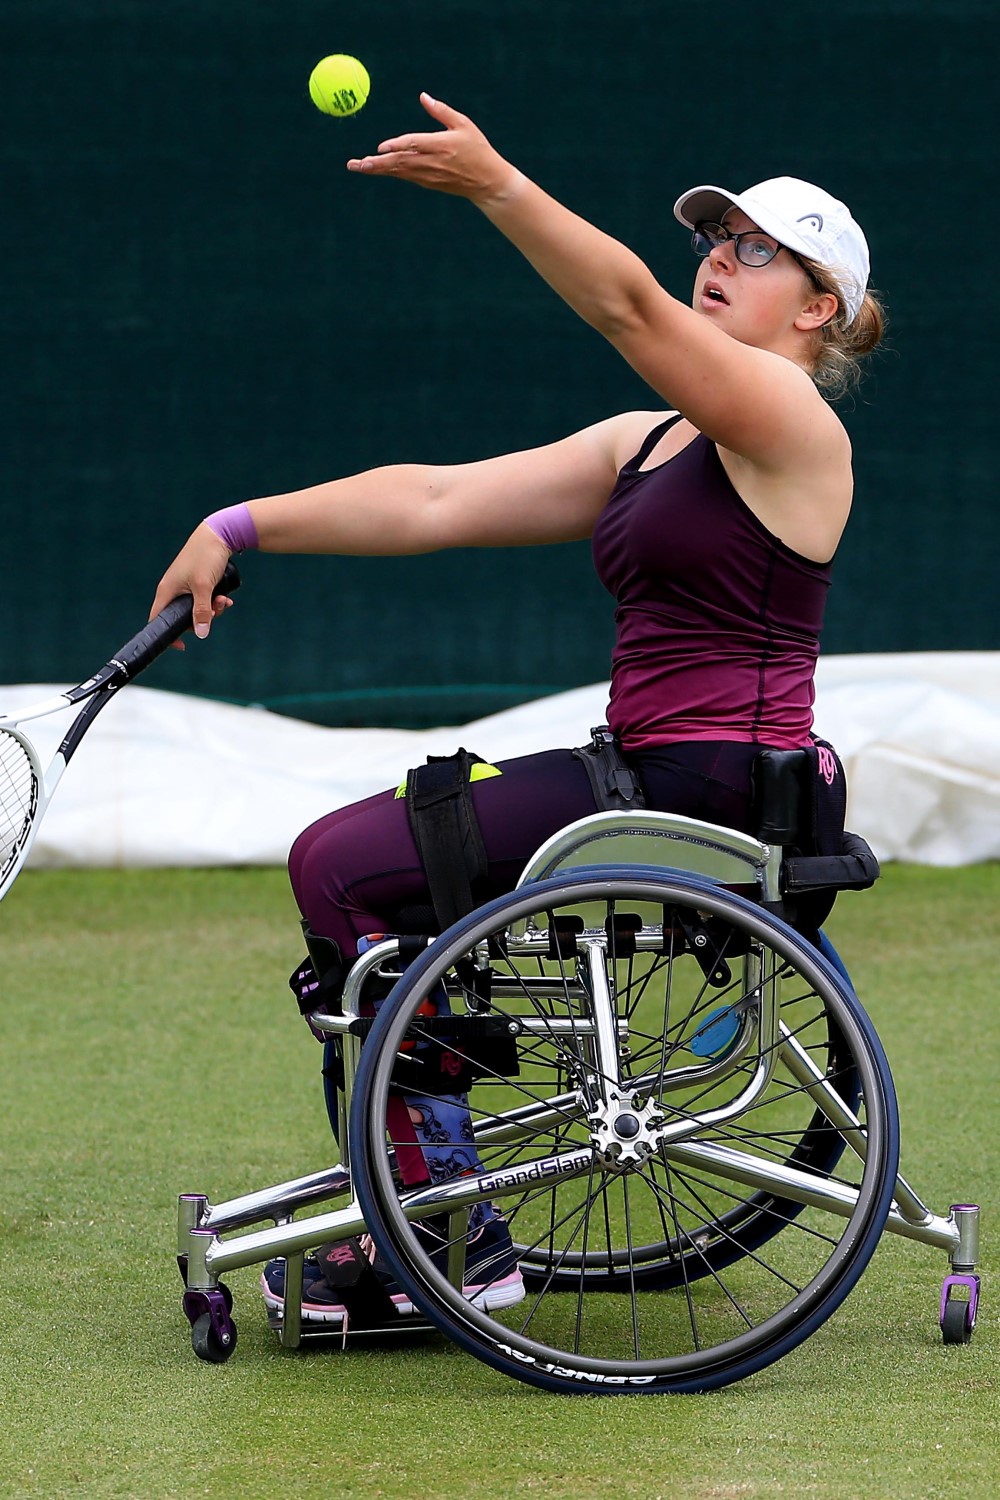 Abbie Breakwell on court in her wheelchair throwing a ball in the air to hit a serve